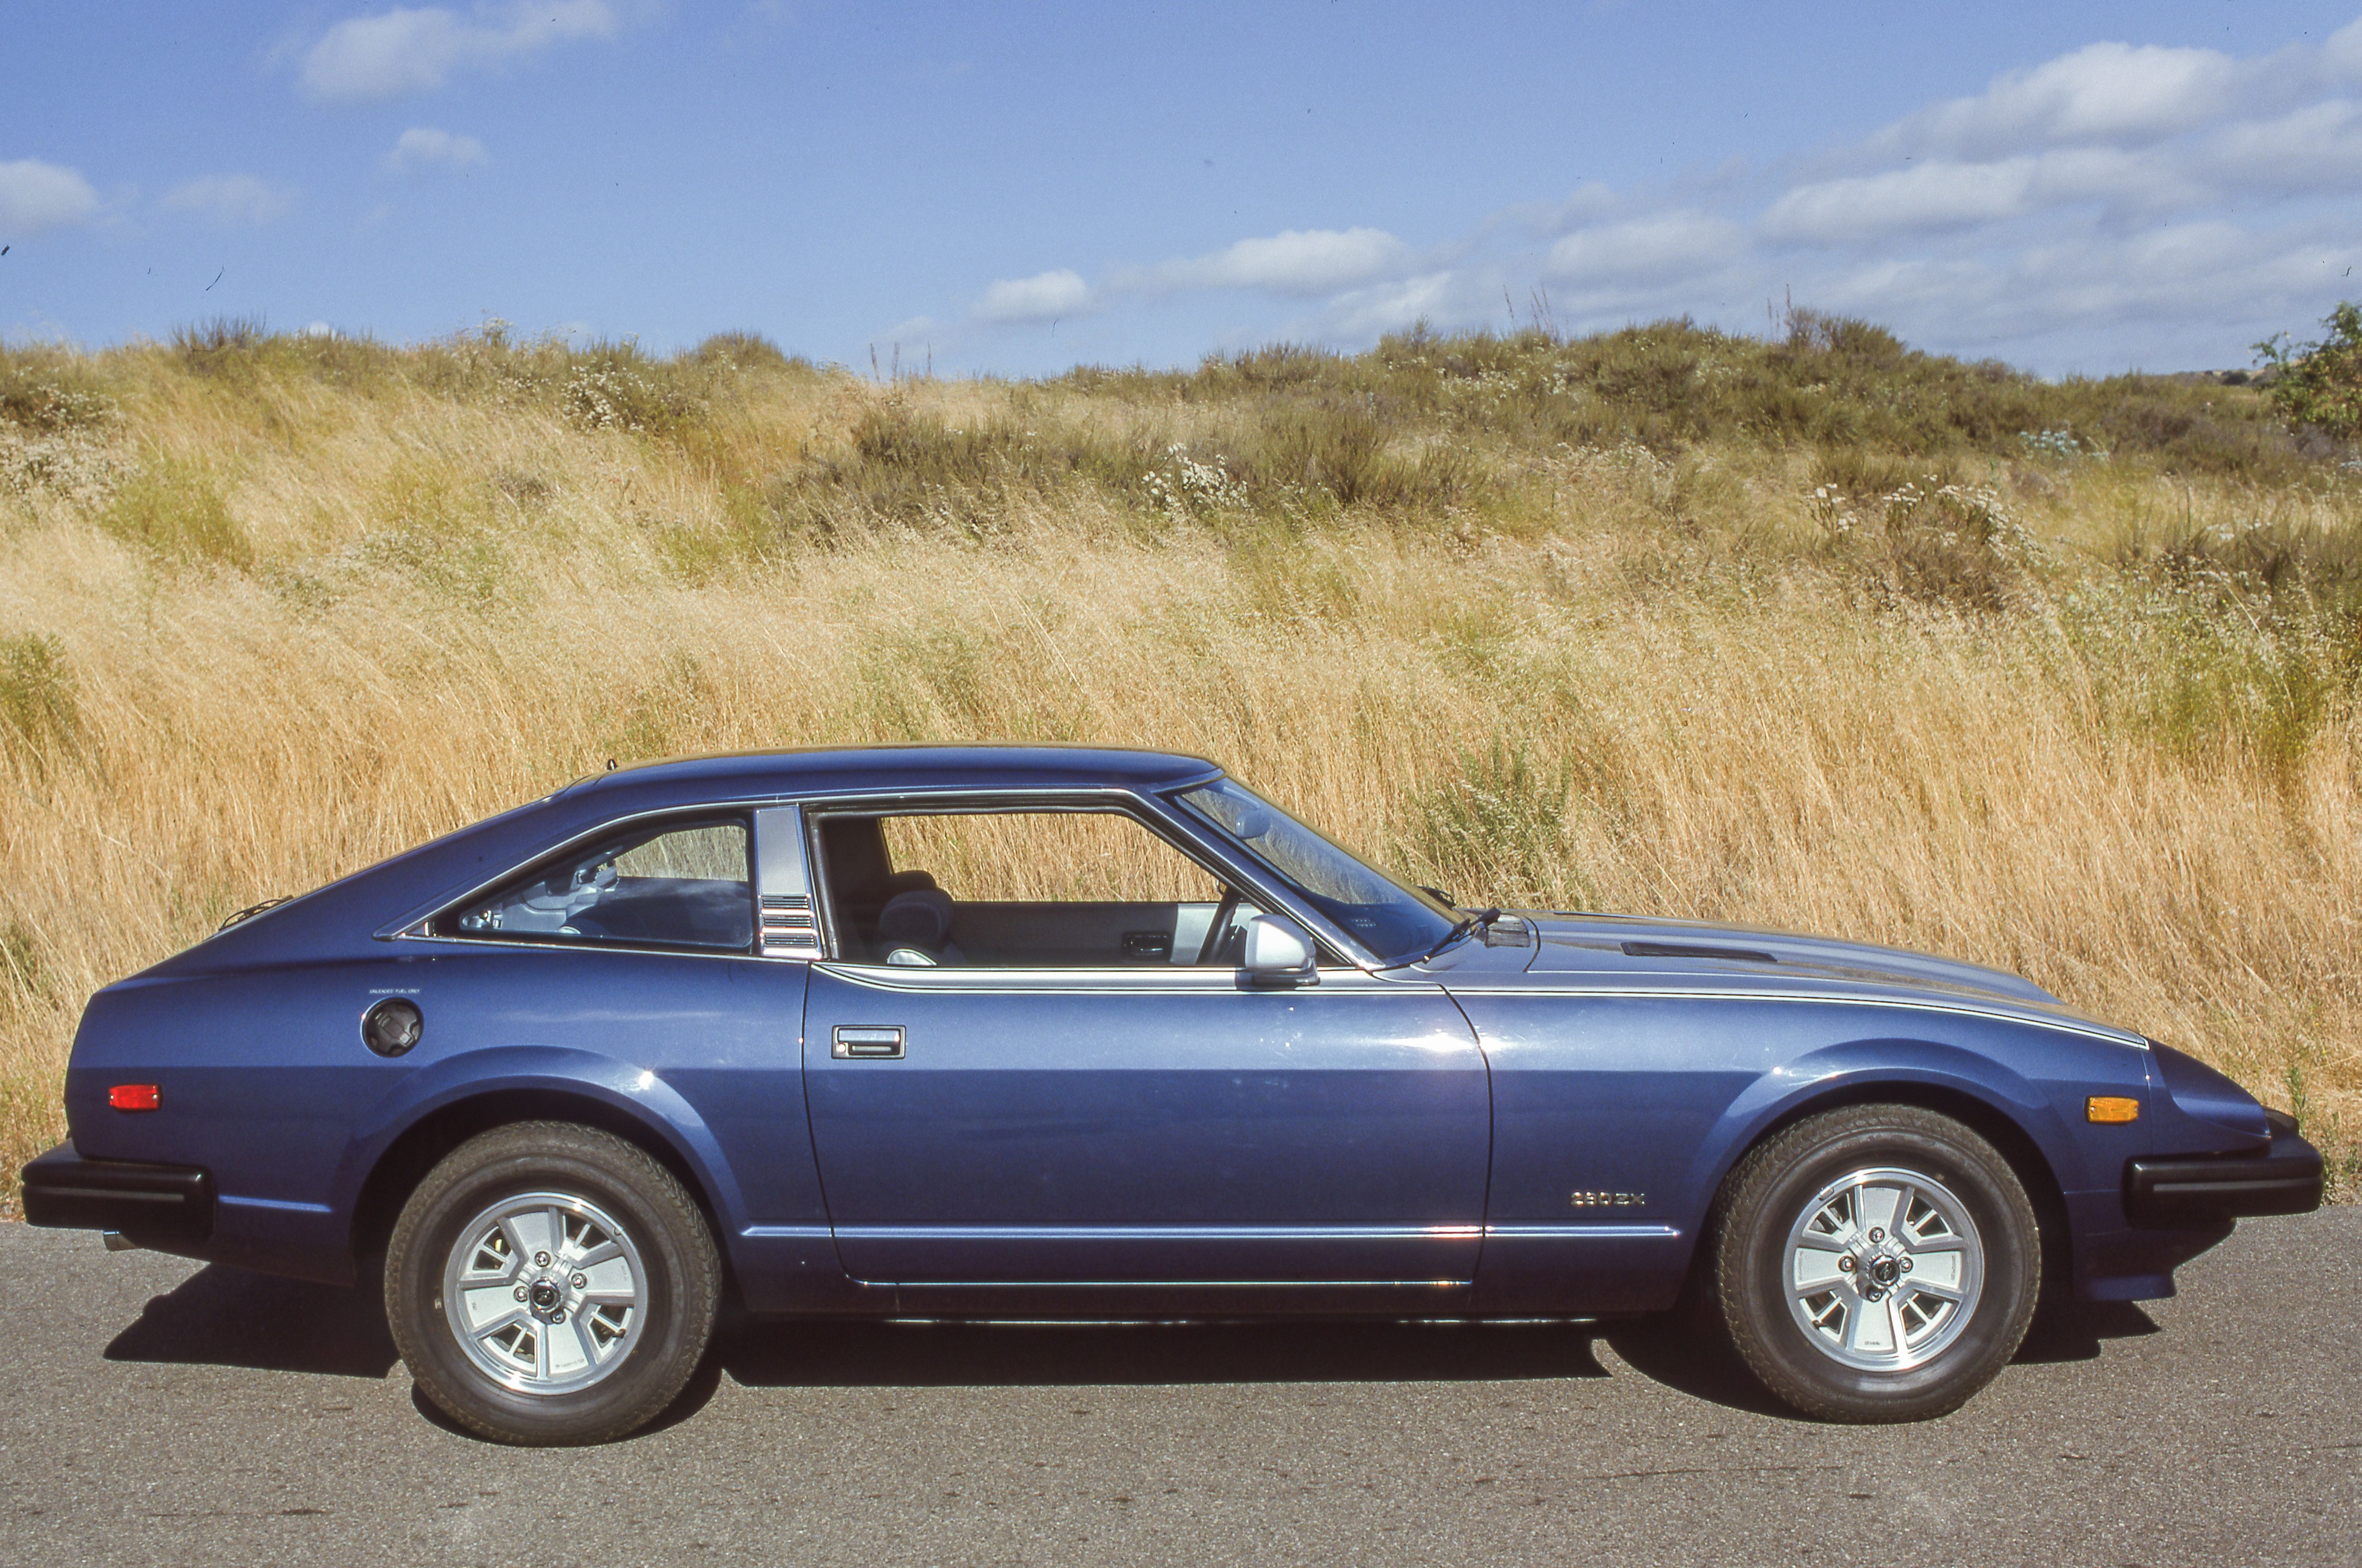 Tested: 1979 Datsun 280ZX Evolves Into a Personal Luxury Car